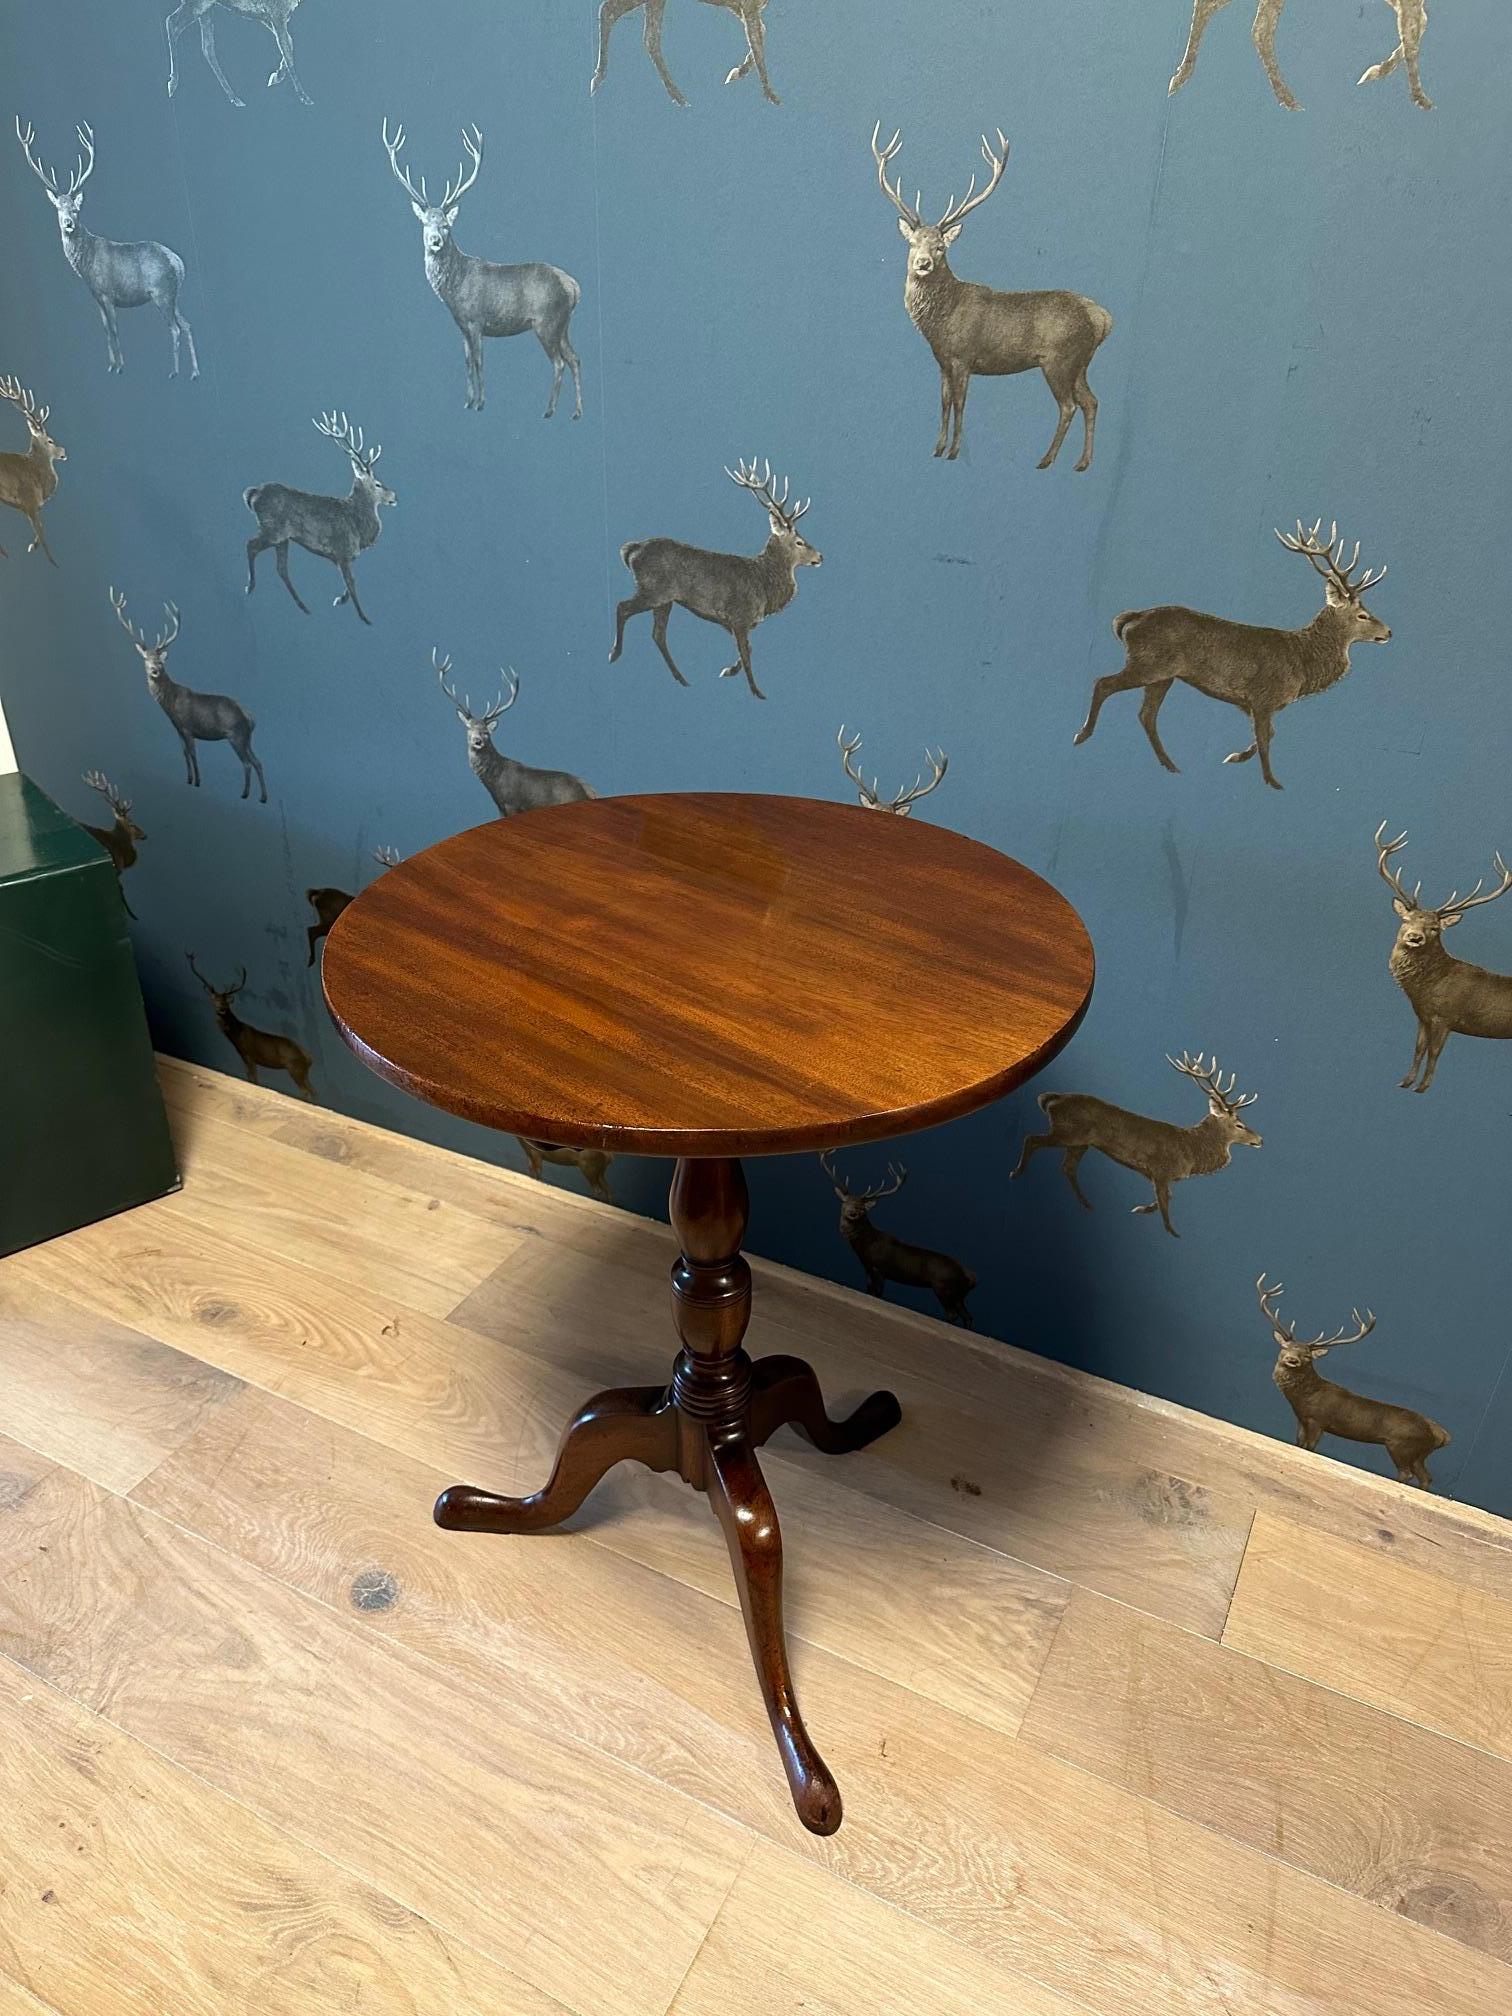 Beautiful antique mahogany side table. Also called a tilt top table.
It is a table from the 18th century in perfect condition. Warm colour.
Top is made from 1 piece of mahogany.
Origin: England
Period: ca. 1780
Size: Diameter 58cm, height 74cm